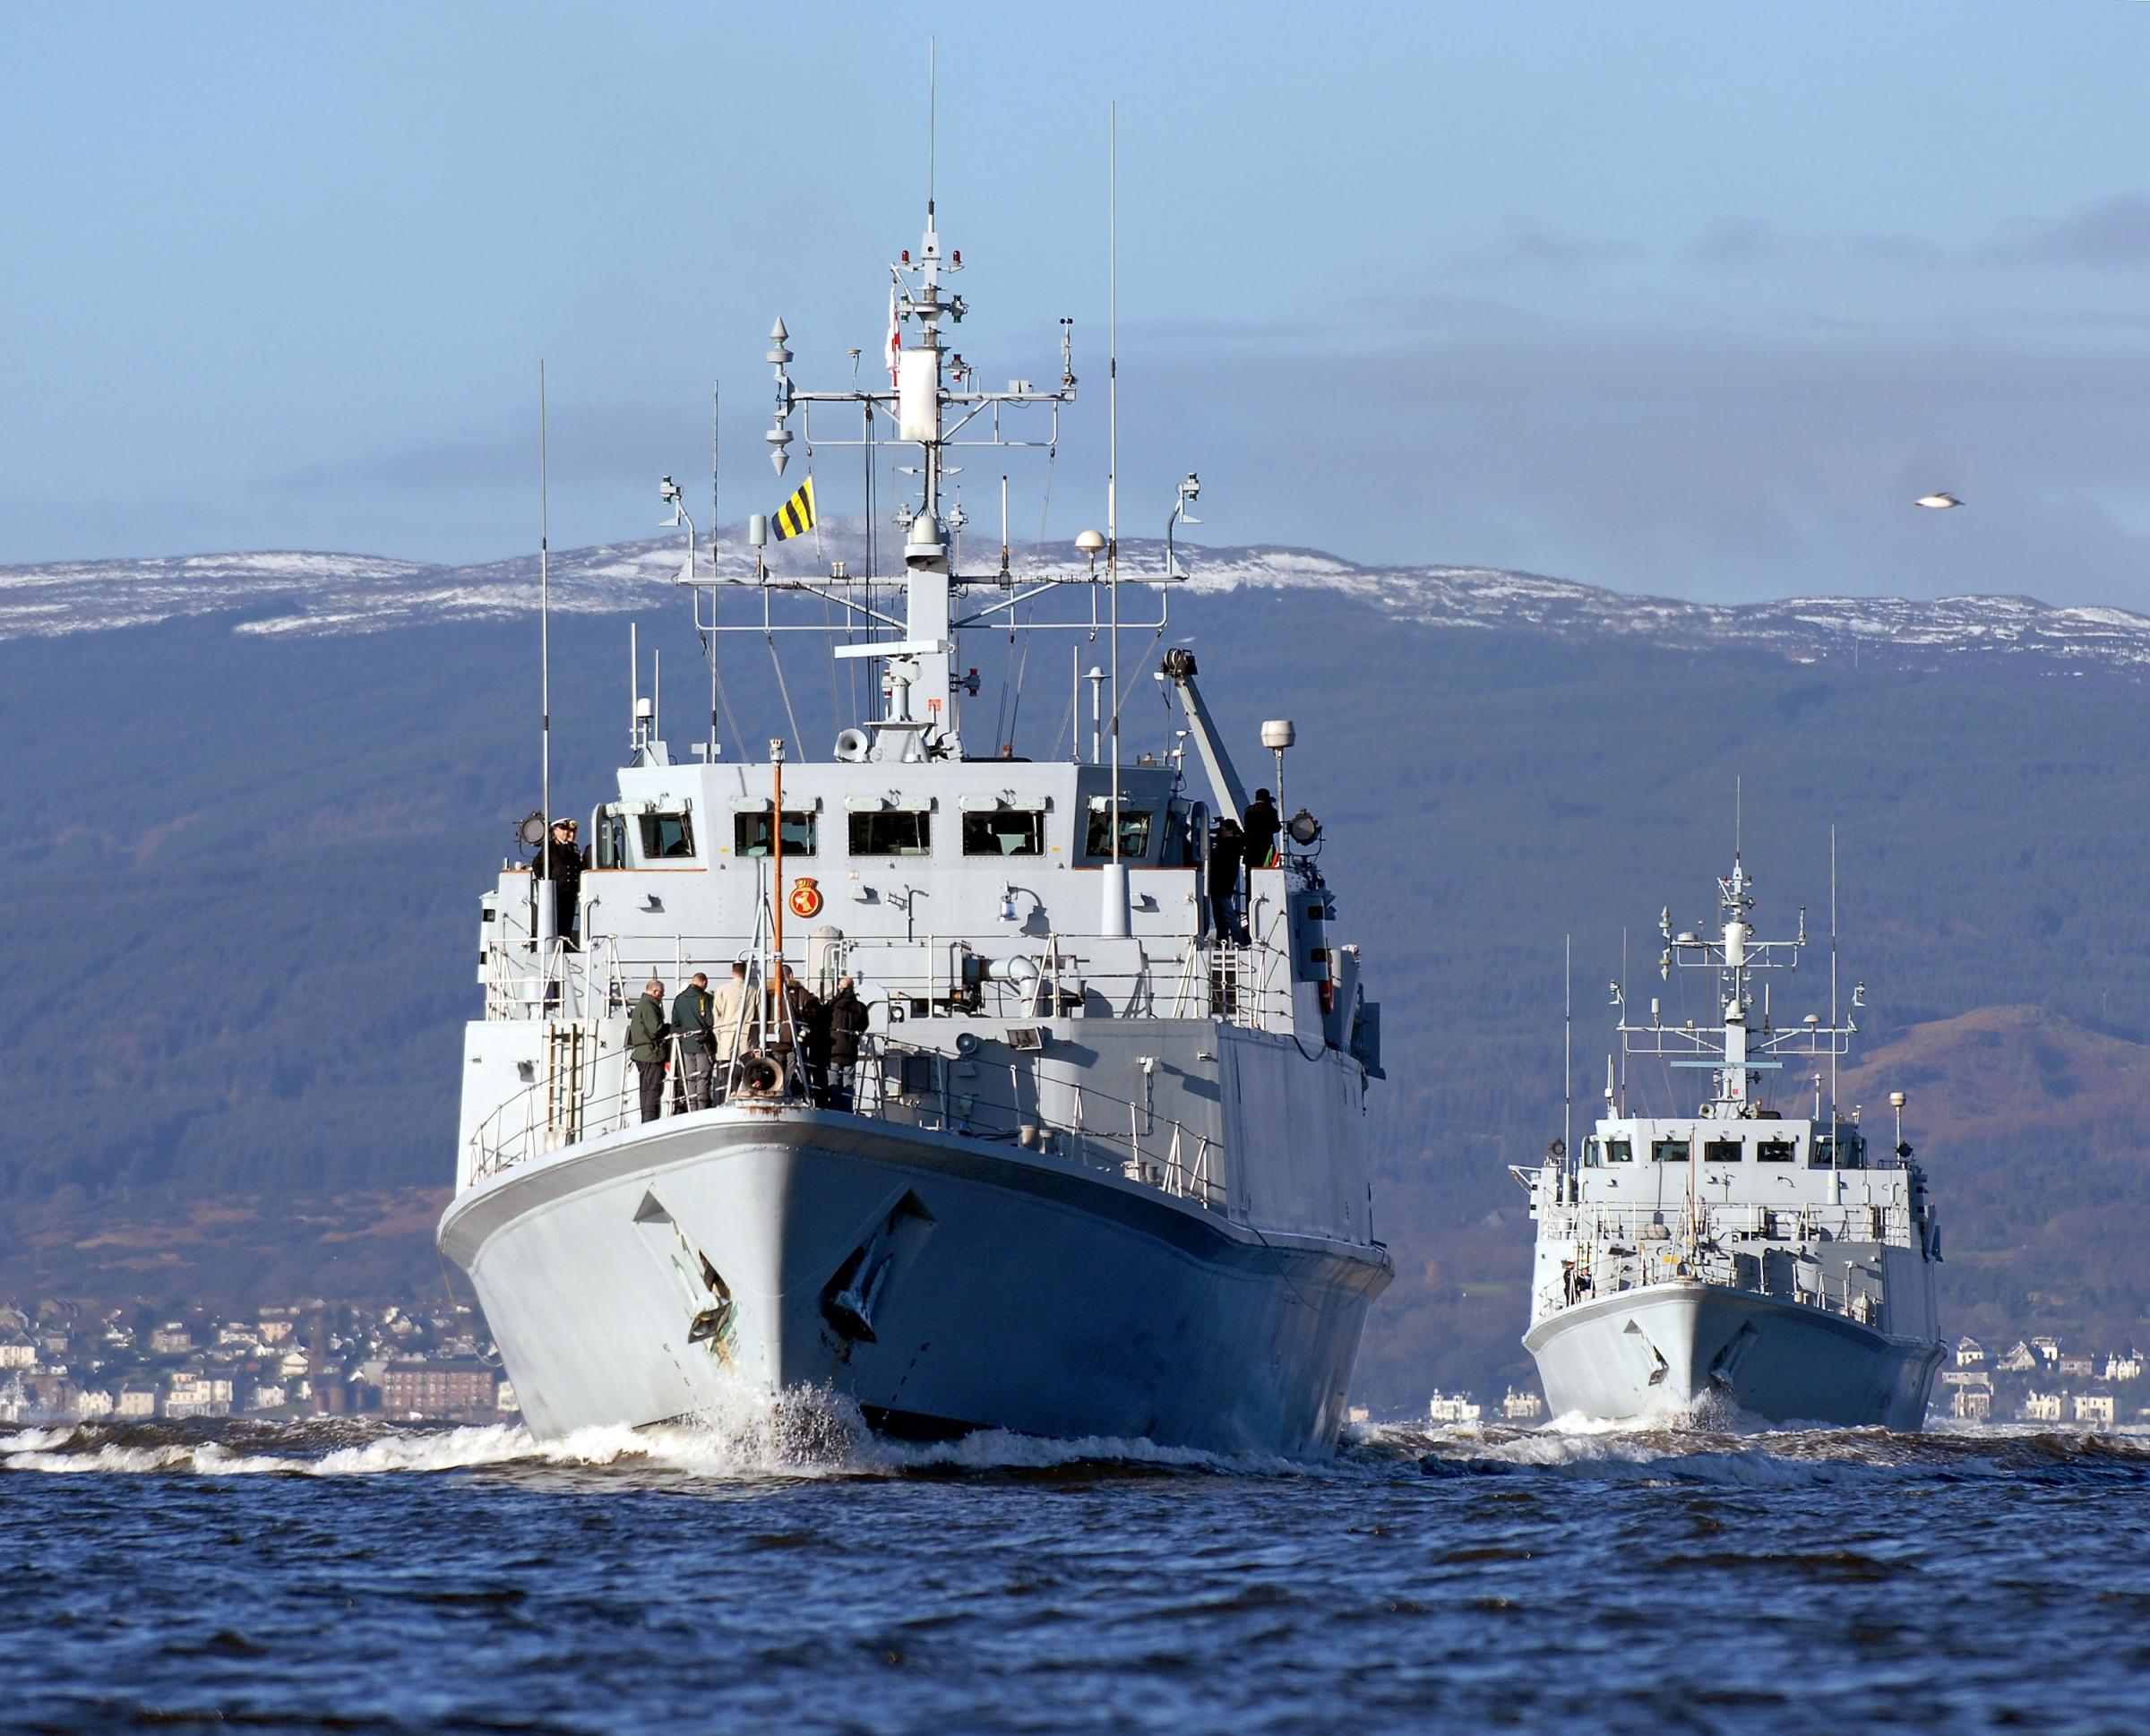 HMS Blyth and HMS Ramsey will take part in Exercise Joint Warrior